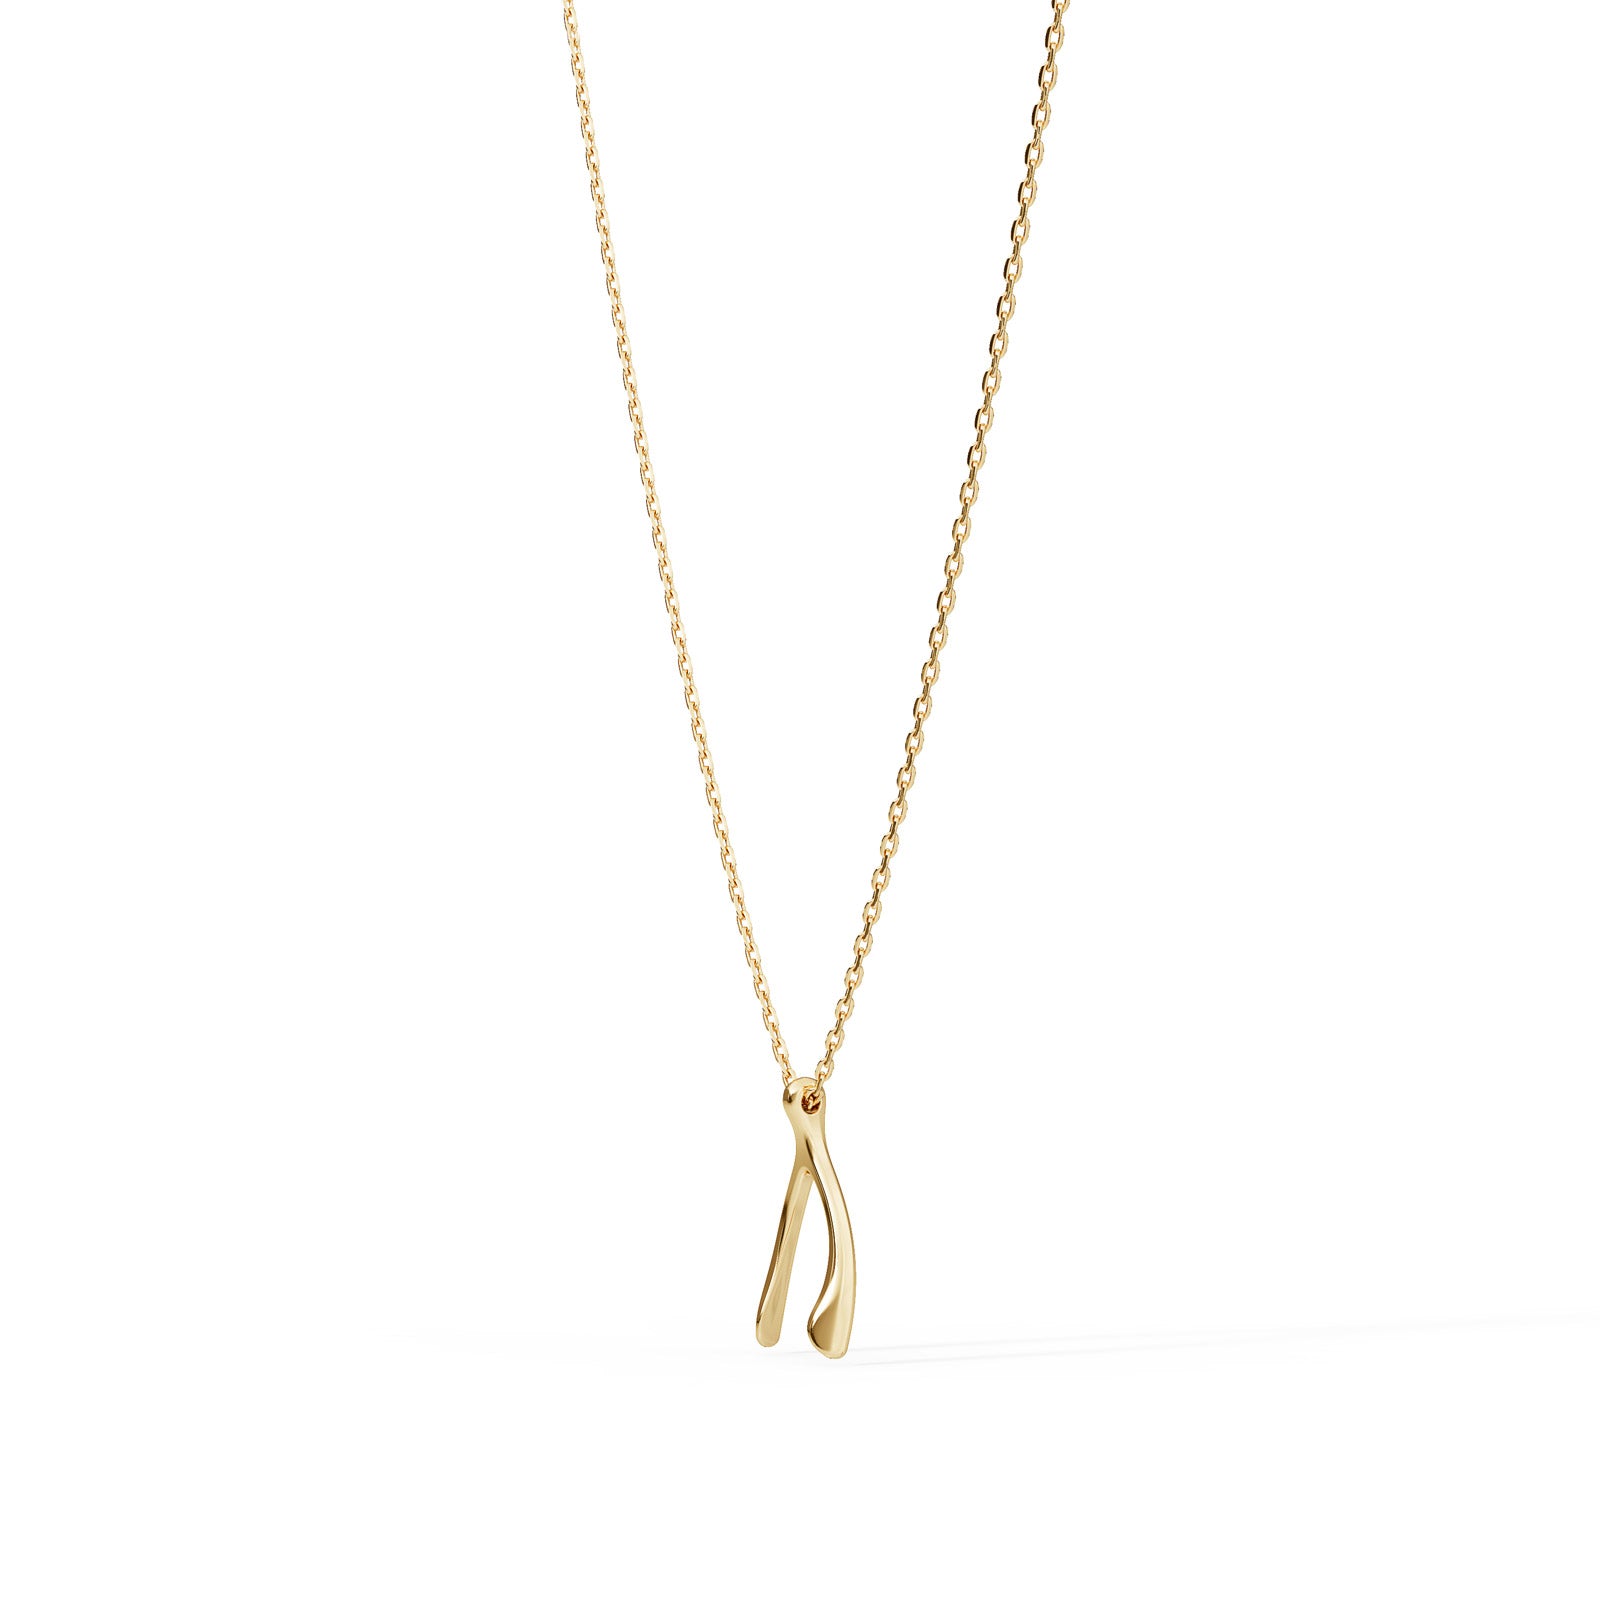 Wishbone Chain Necklace in 14K Yellow Gold